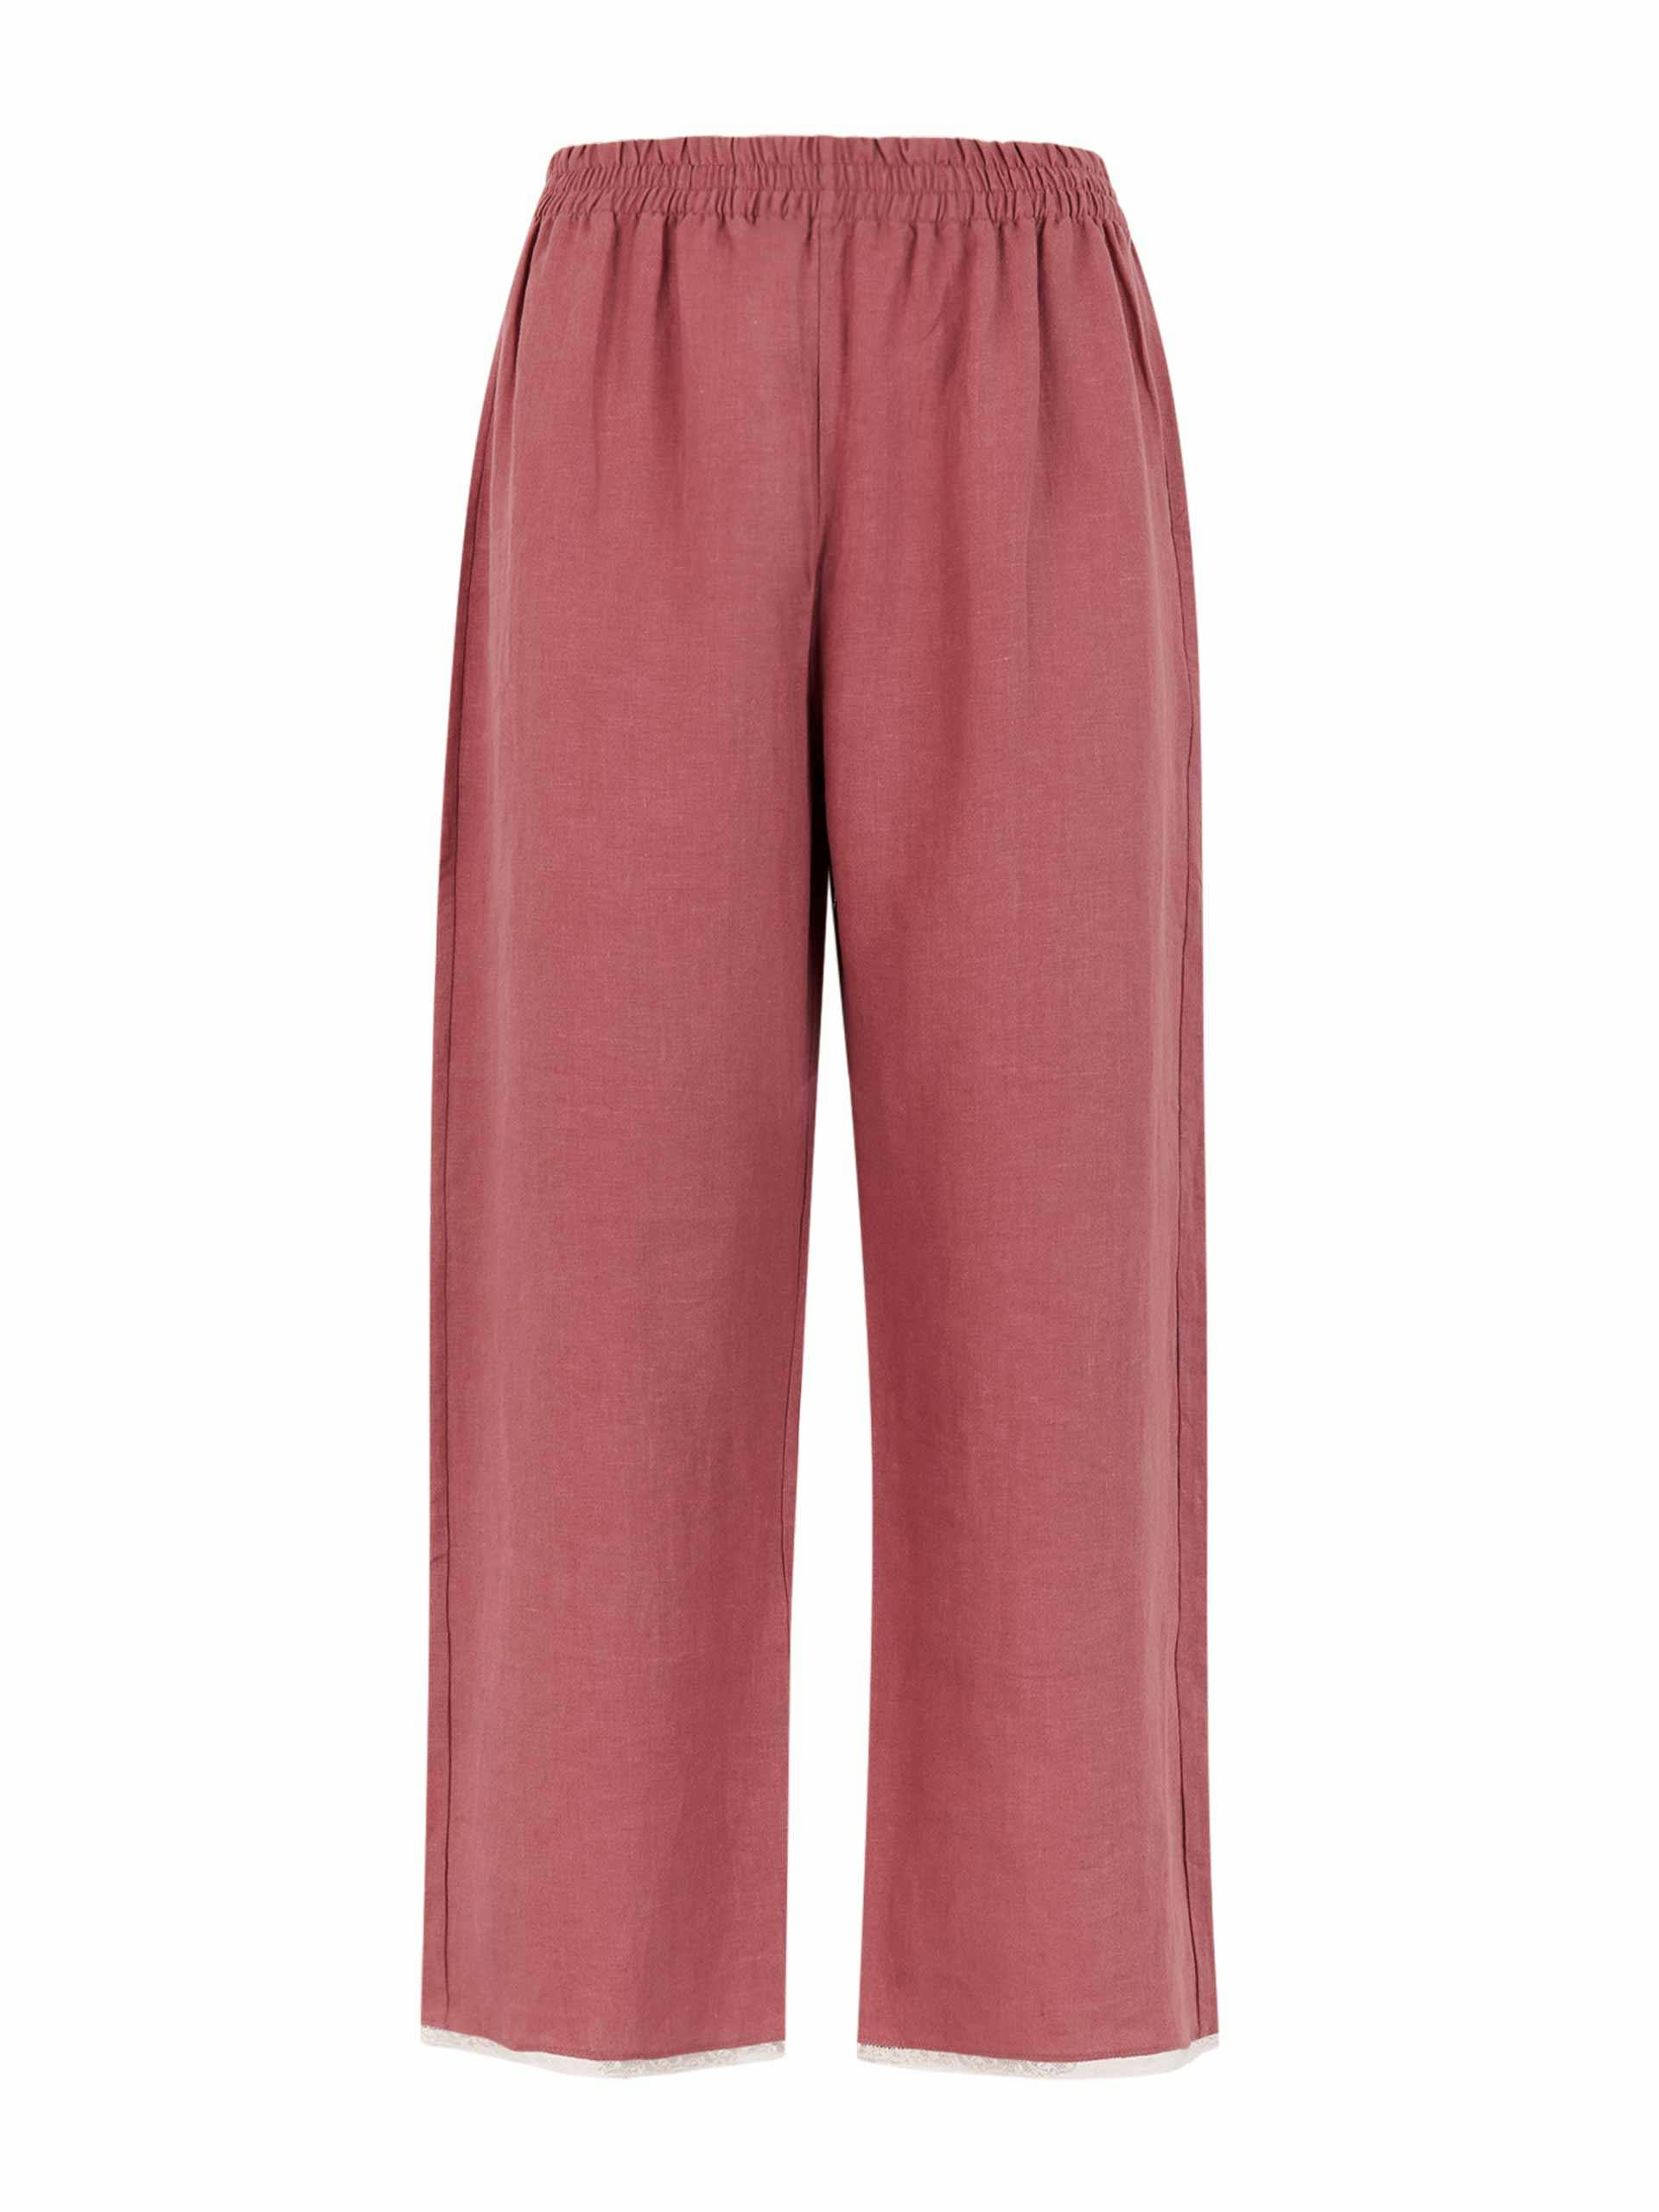 Pink cropped linen Giselle trousers